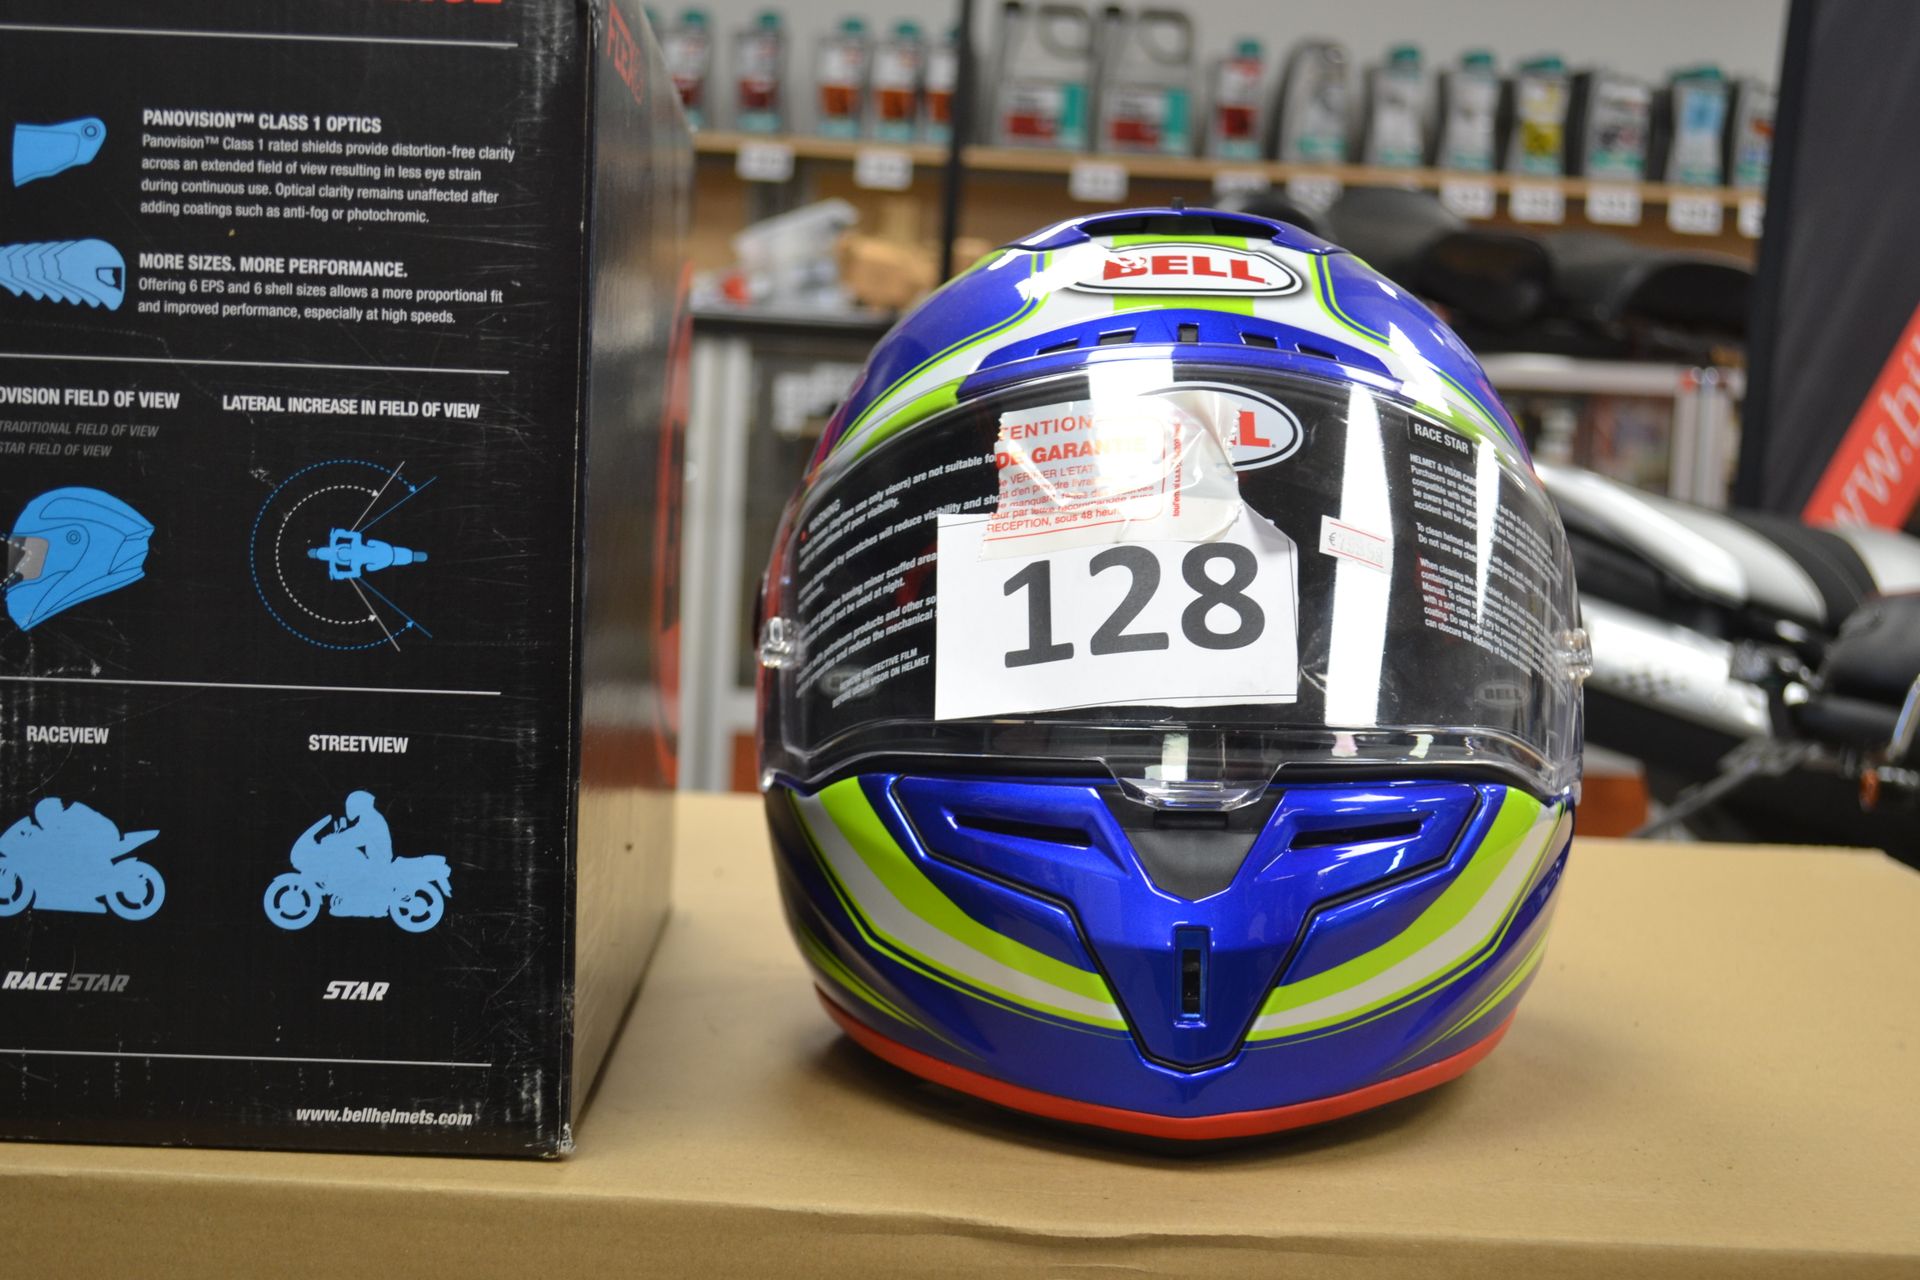 Null Casque neuf BELL STAR SERIES (Race Star), taille M, avec sa boîte